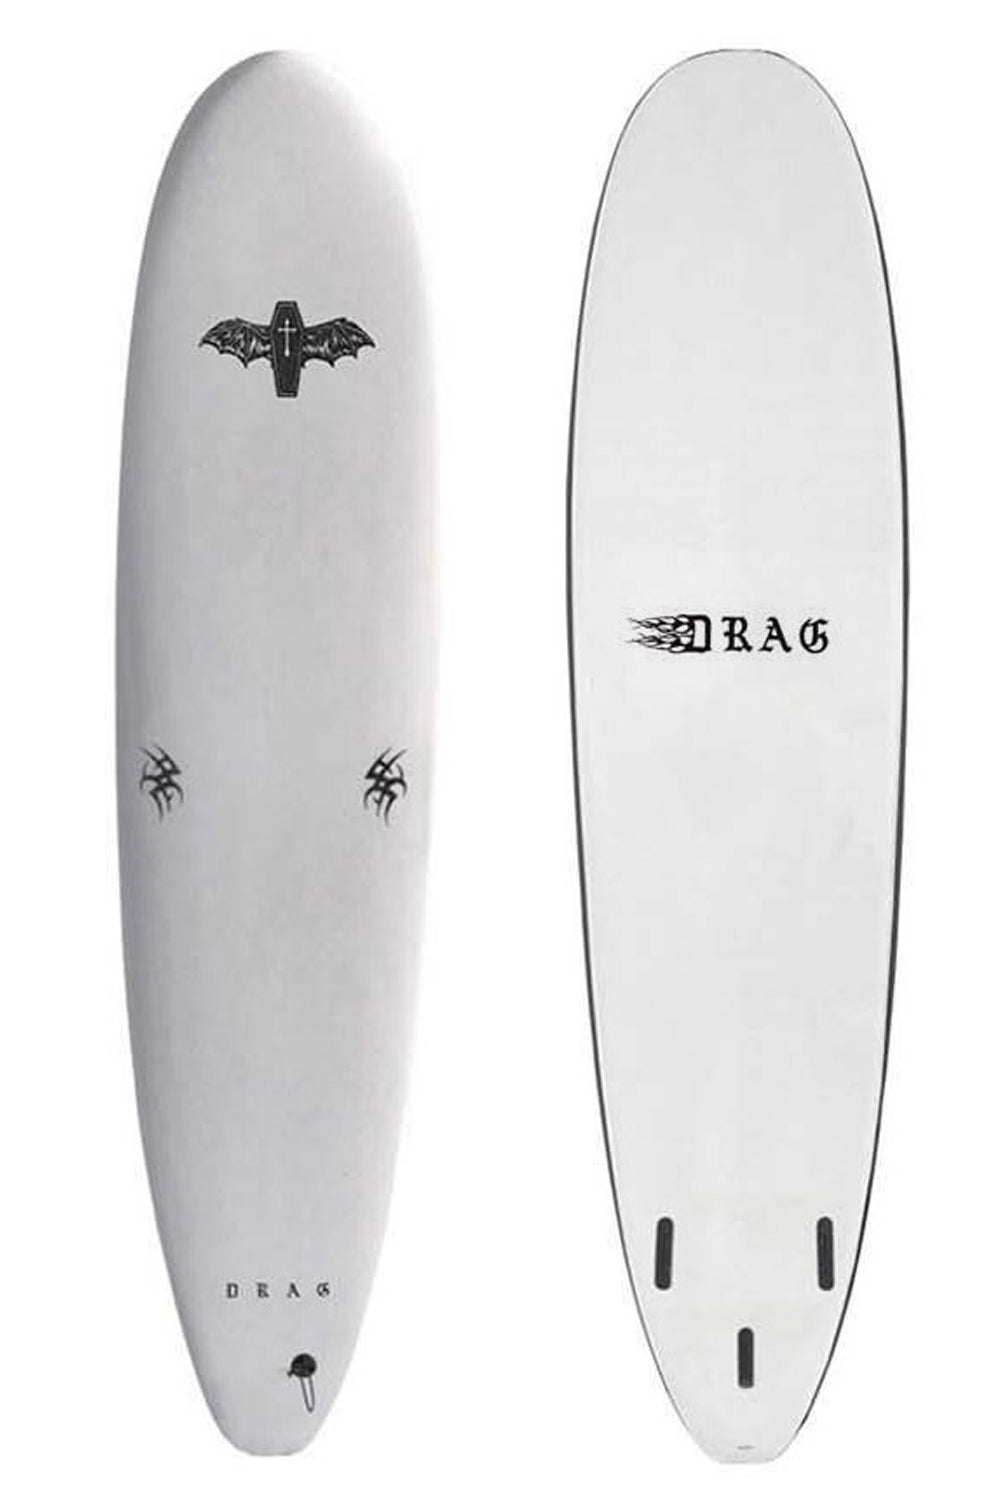 Drag Coffin 8’0 Thruster Softboard - Comes with fins